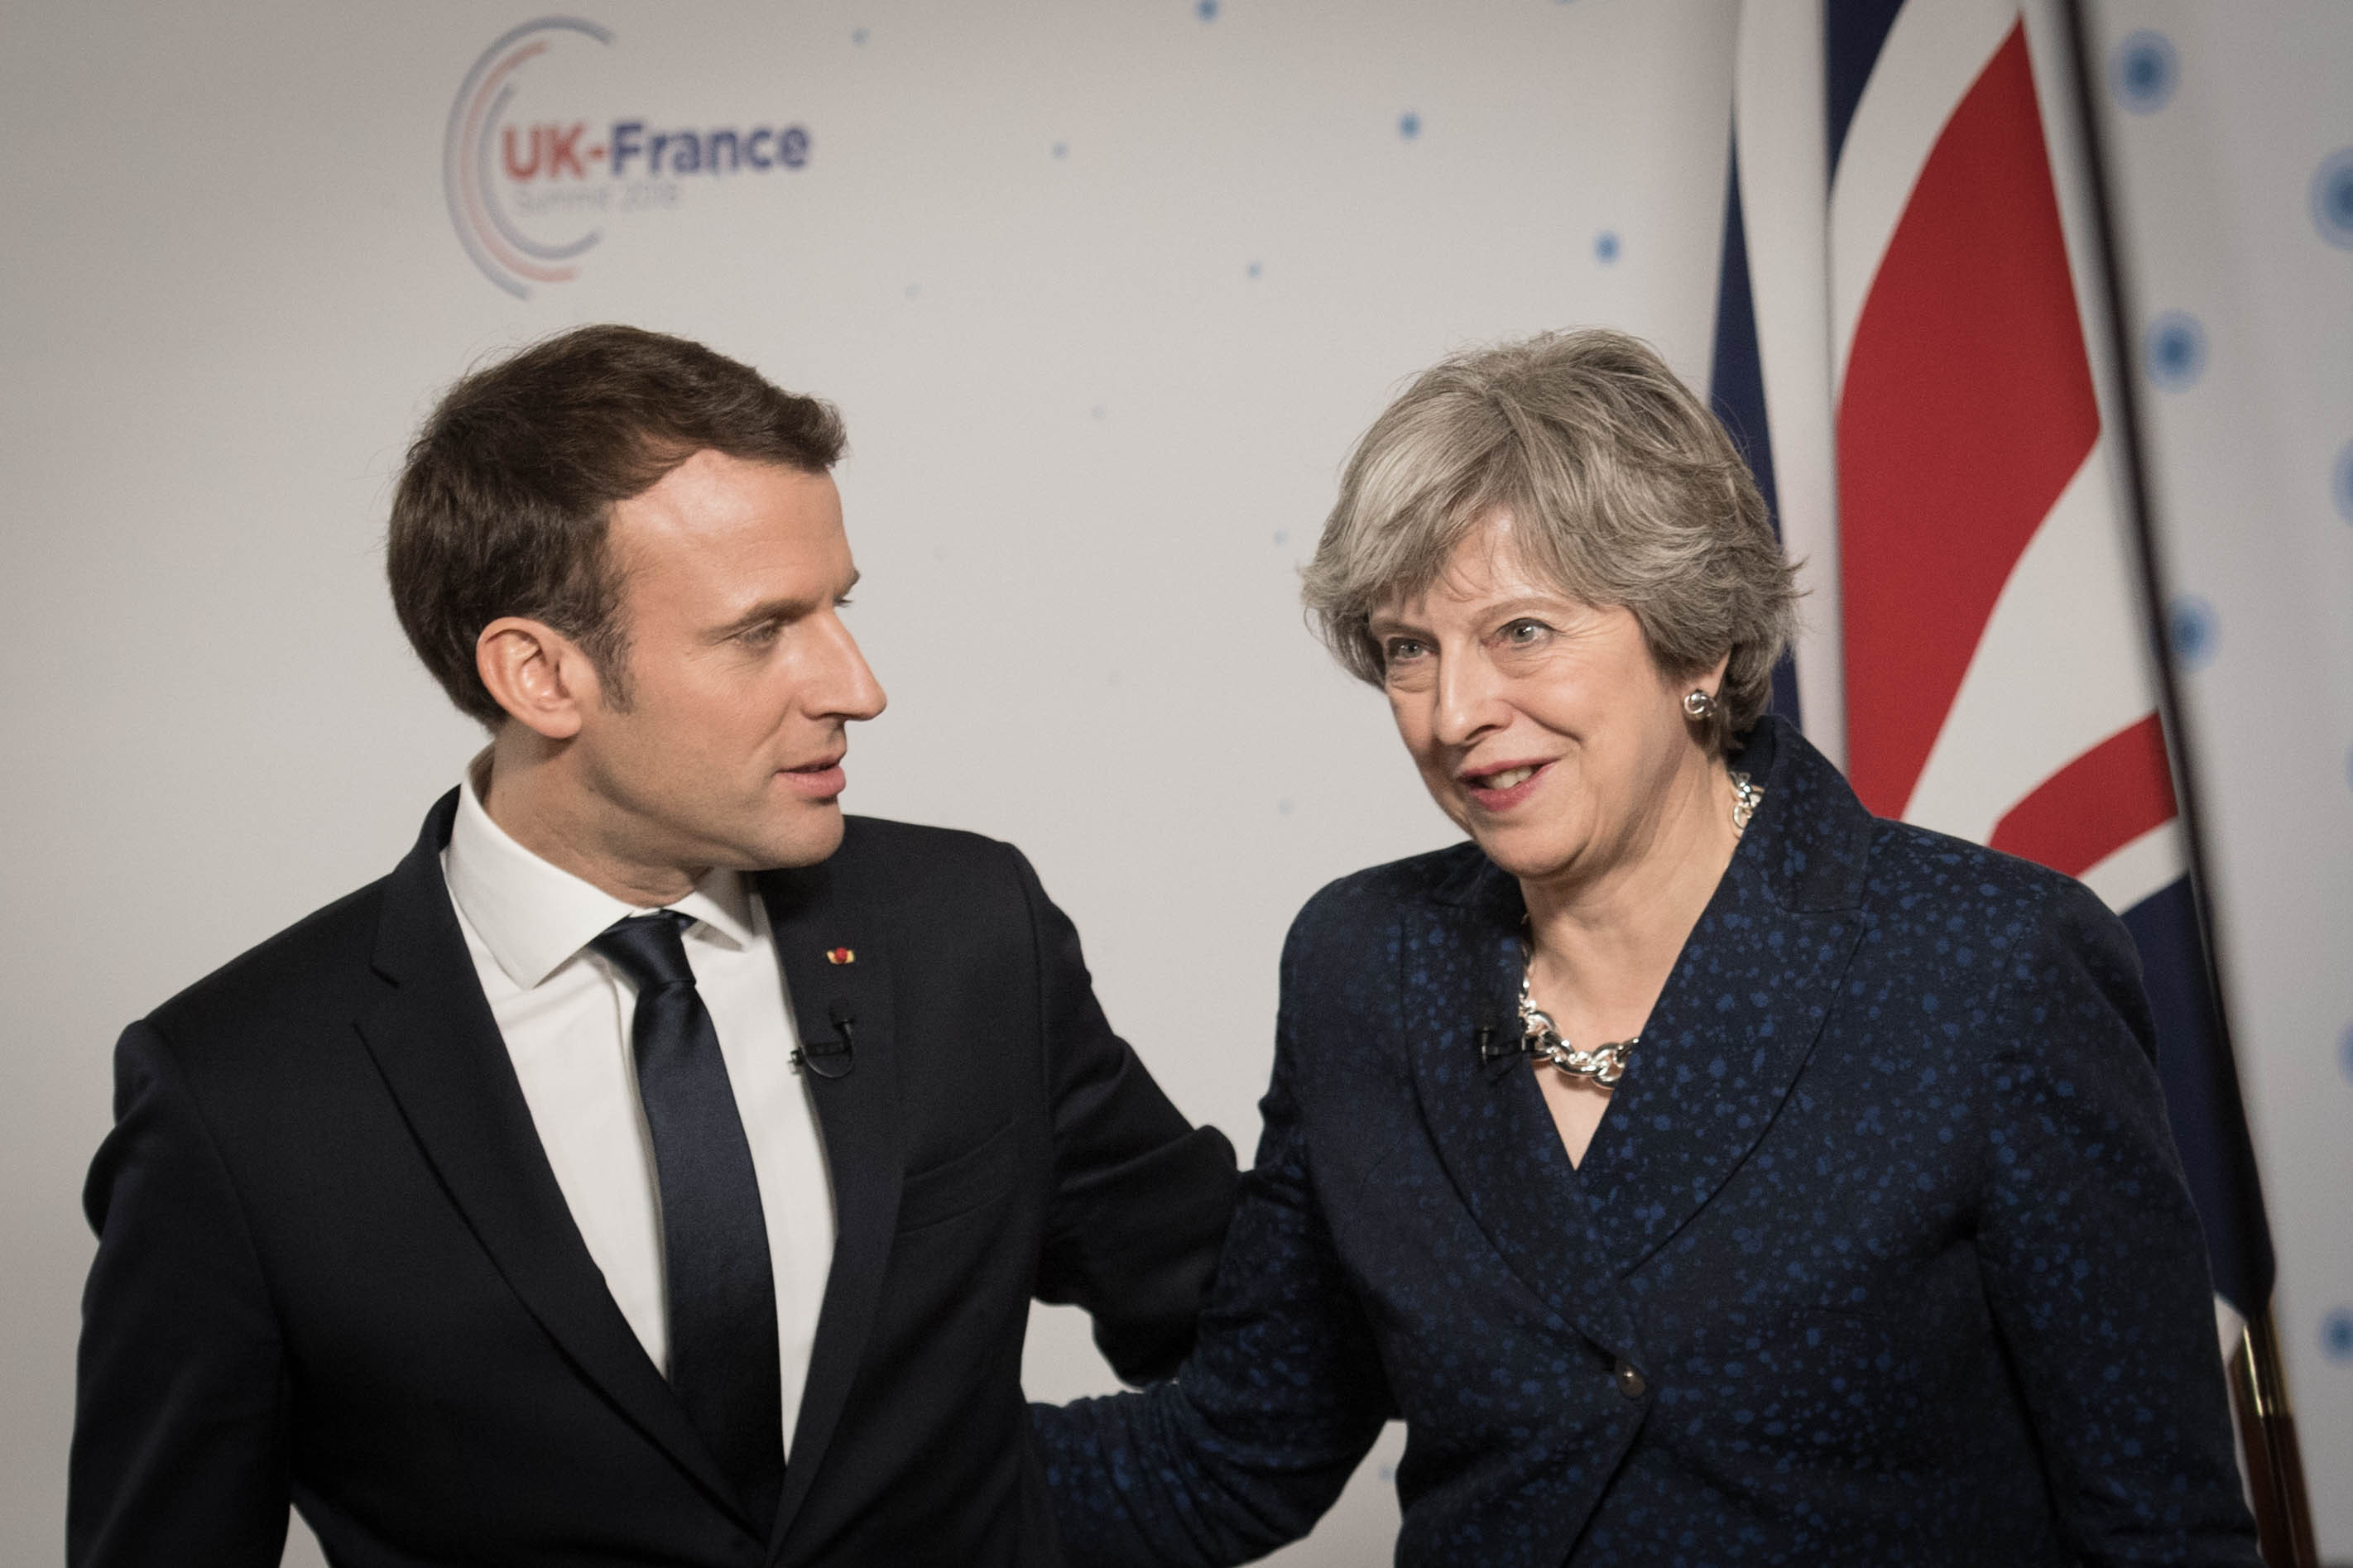 Macron said of the Brexit referendum: 'It&rsquo;s a mistake when you just ask &lsquo;yes&rsquo; or &lsquo;no&rsquo;, when you don&rsquo;t ask people how to improve the situation and explain how to improve it'.